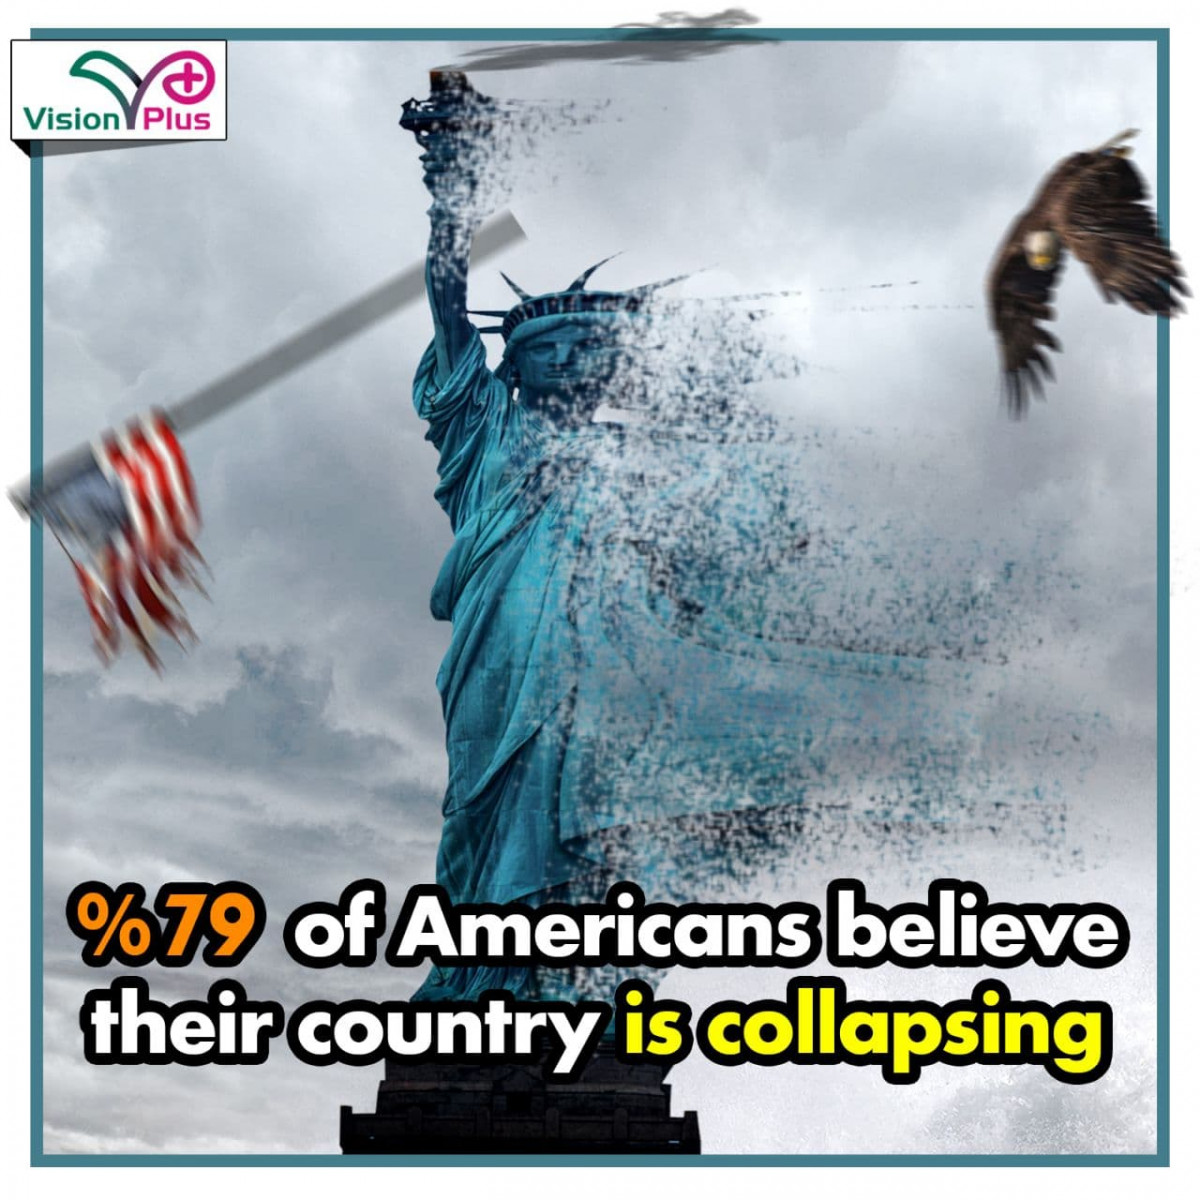 79% of Americans believe their country is collapsing